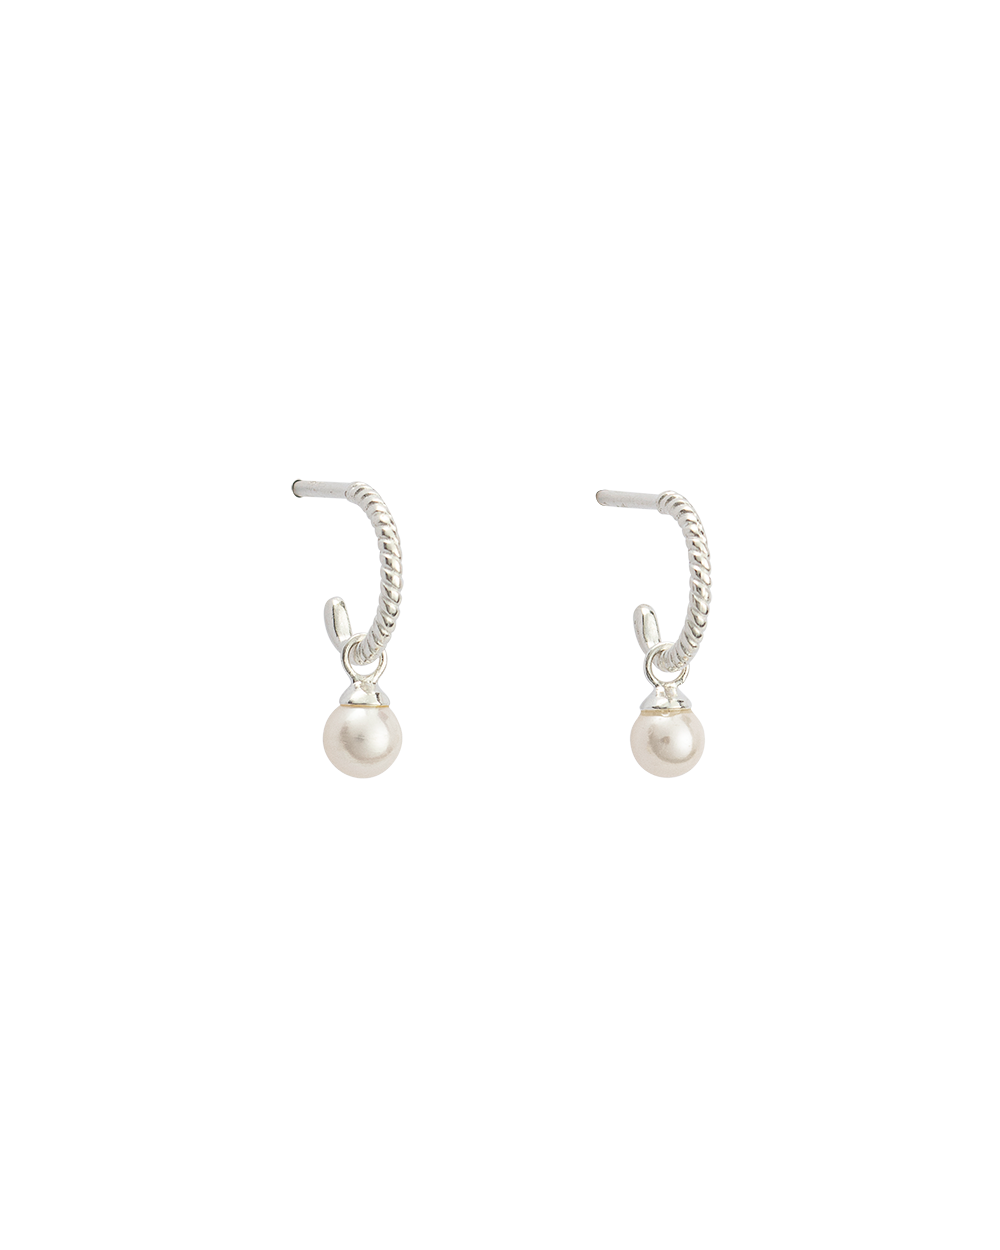 TINY PEARL HOOPS (STERLING SILVER) - IMAGE 1